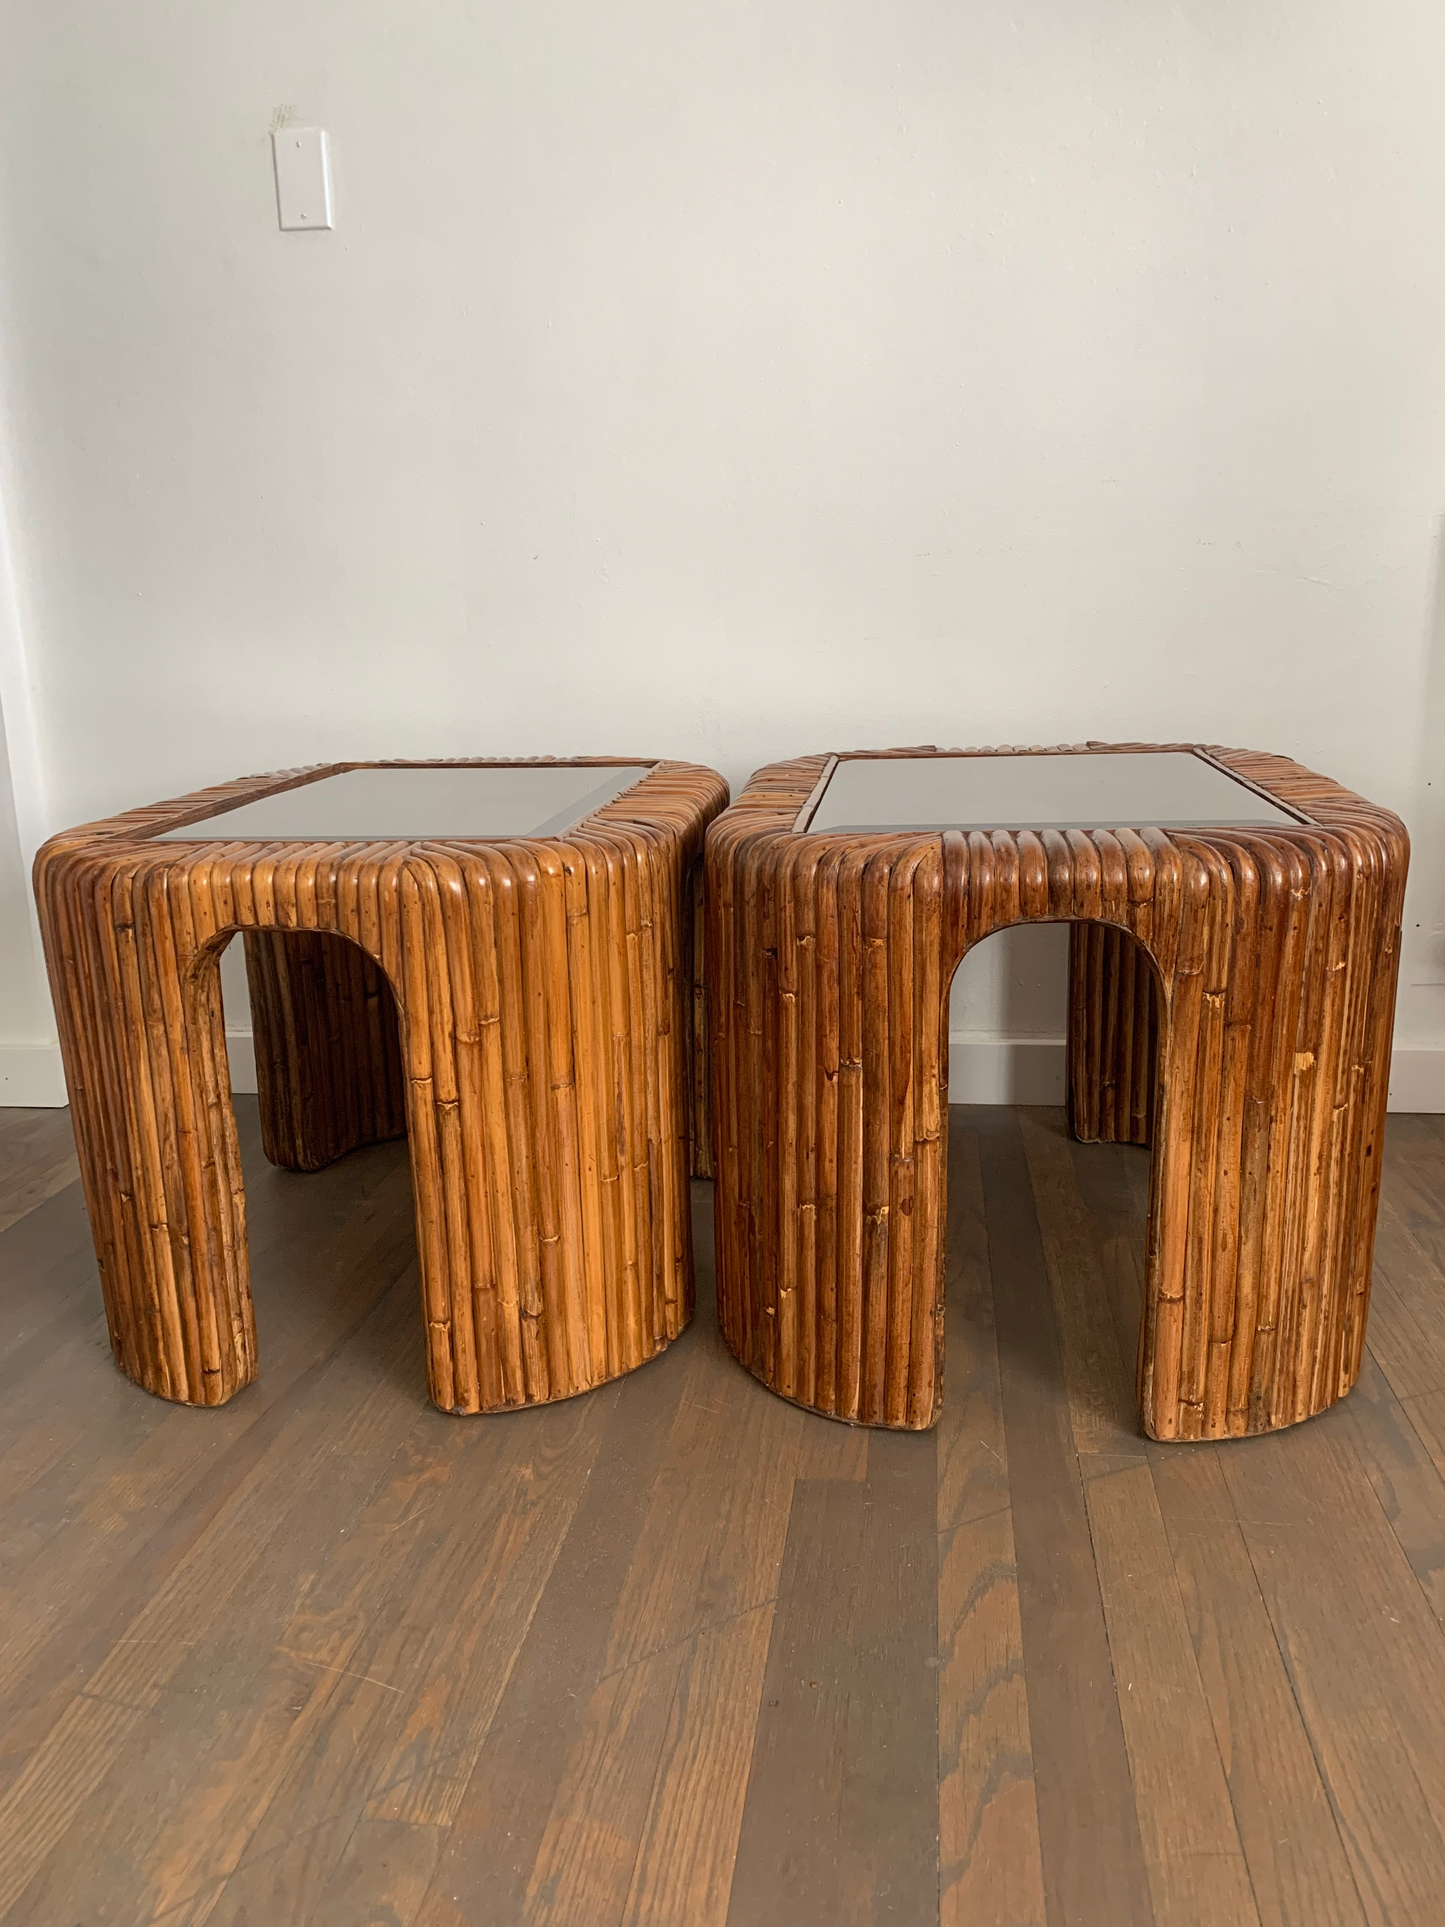 Late 20th Century Split Reed Bamboo Rattan Smoked Glass Waterfall Side Tables - a Pair